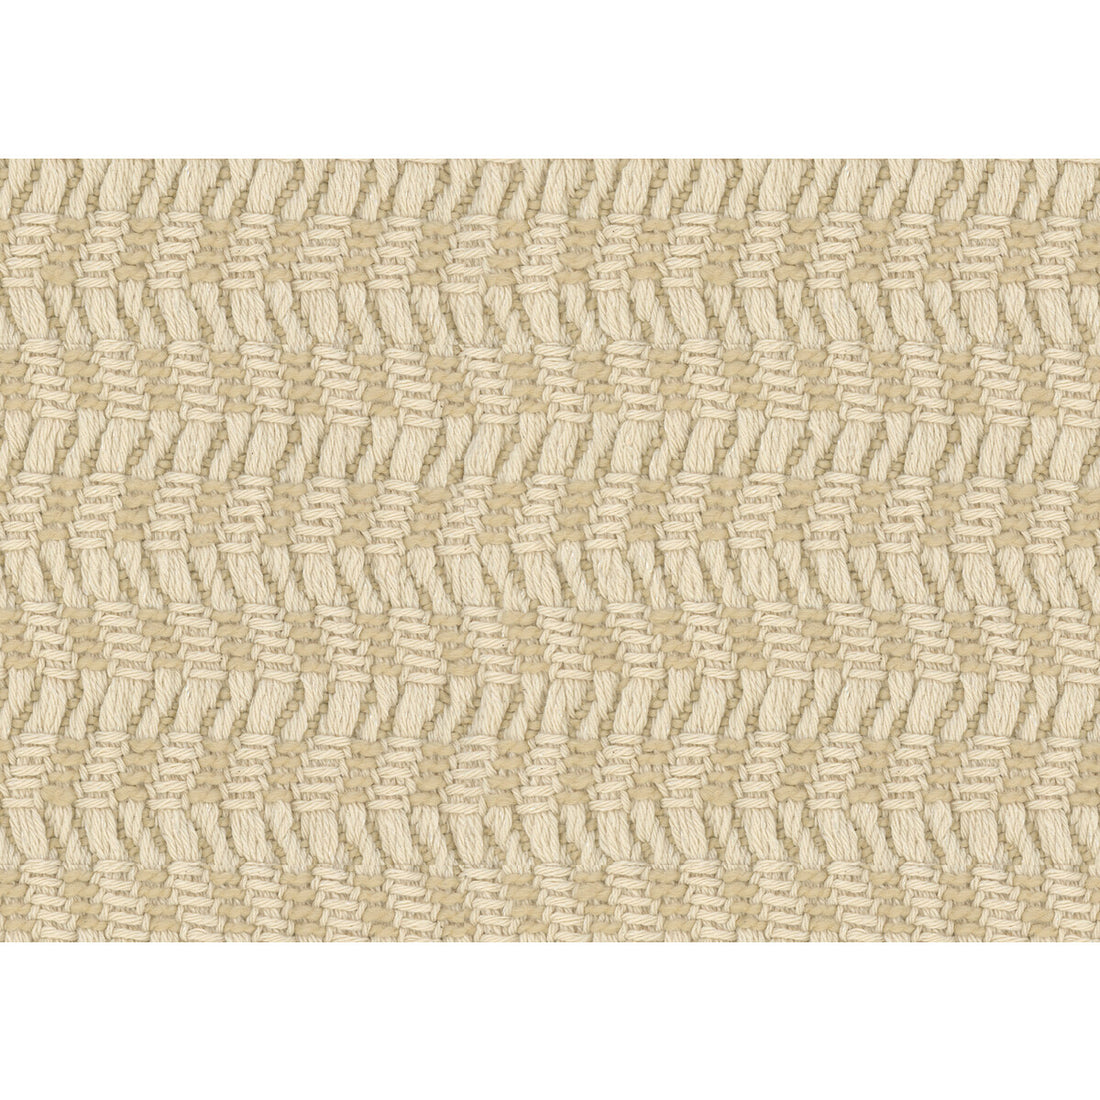 Jumper fabric in toast color - pattern GWF-3714.16.0 - by Lee Jofa Modern in the Kelly Wearstler Textures collection